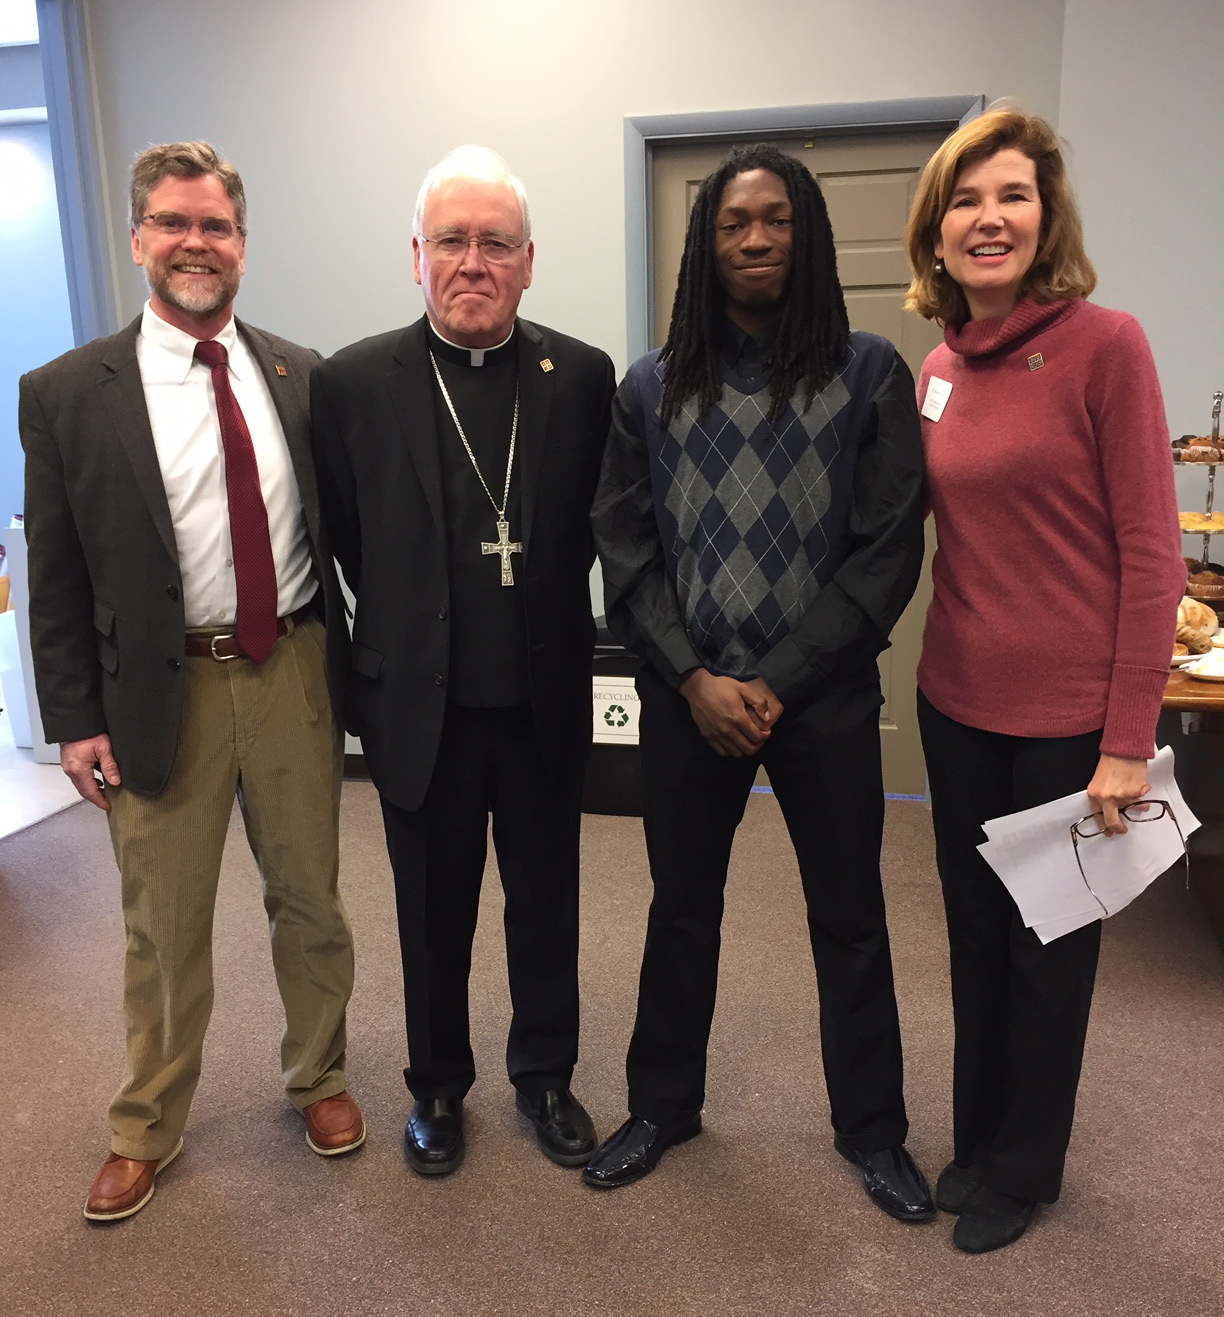 Bishop Malone with Jamie Bin-huguley who spoke at the workshop; along with Catholic Charities Appeal General Chairs John & Ruthanne Daly. 